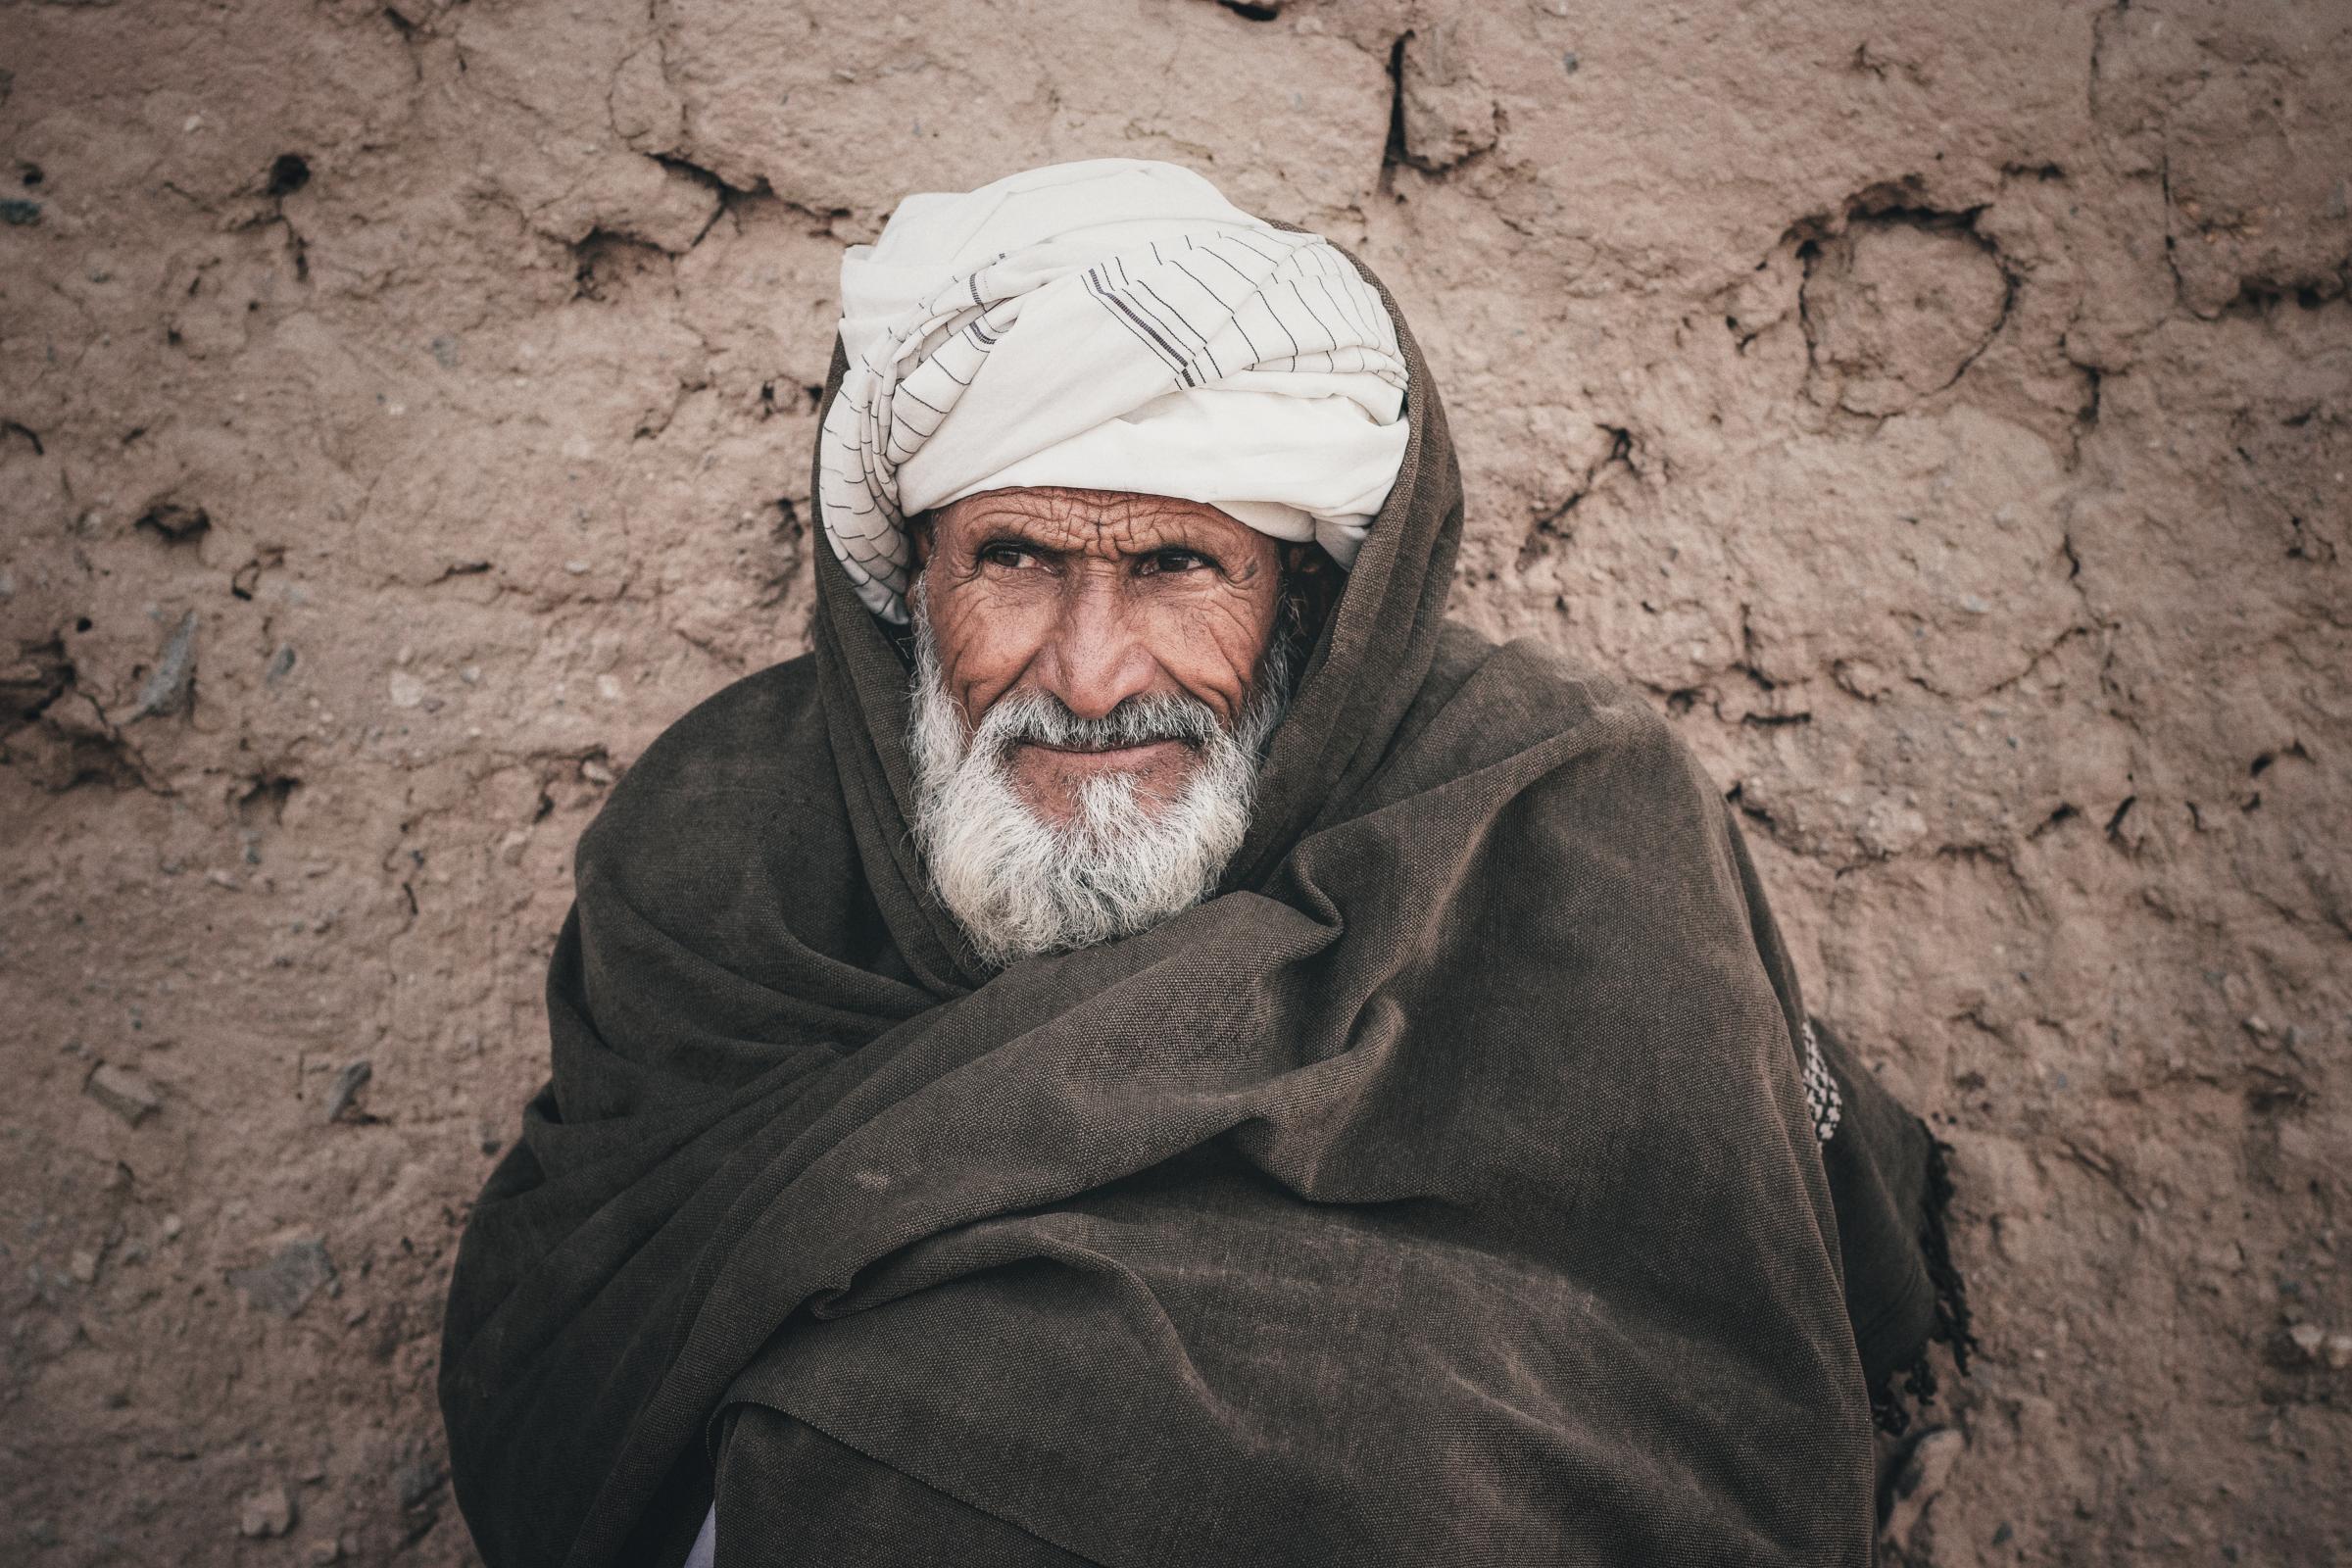 Two centuries of living with the people of Afghanistan - Faces from different tribes and regions of Afghanistan. In this collection, I have tried not to...